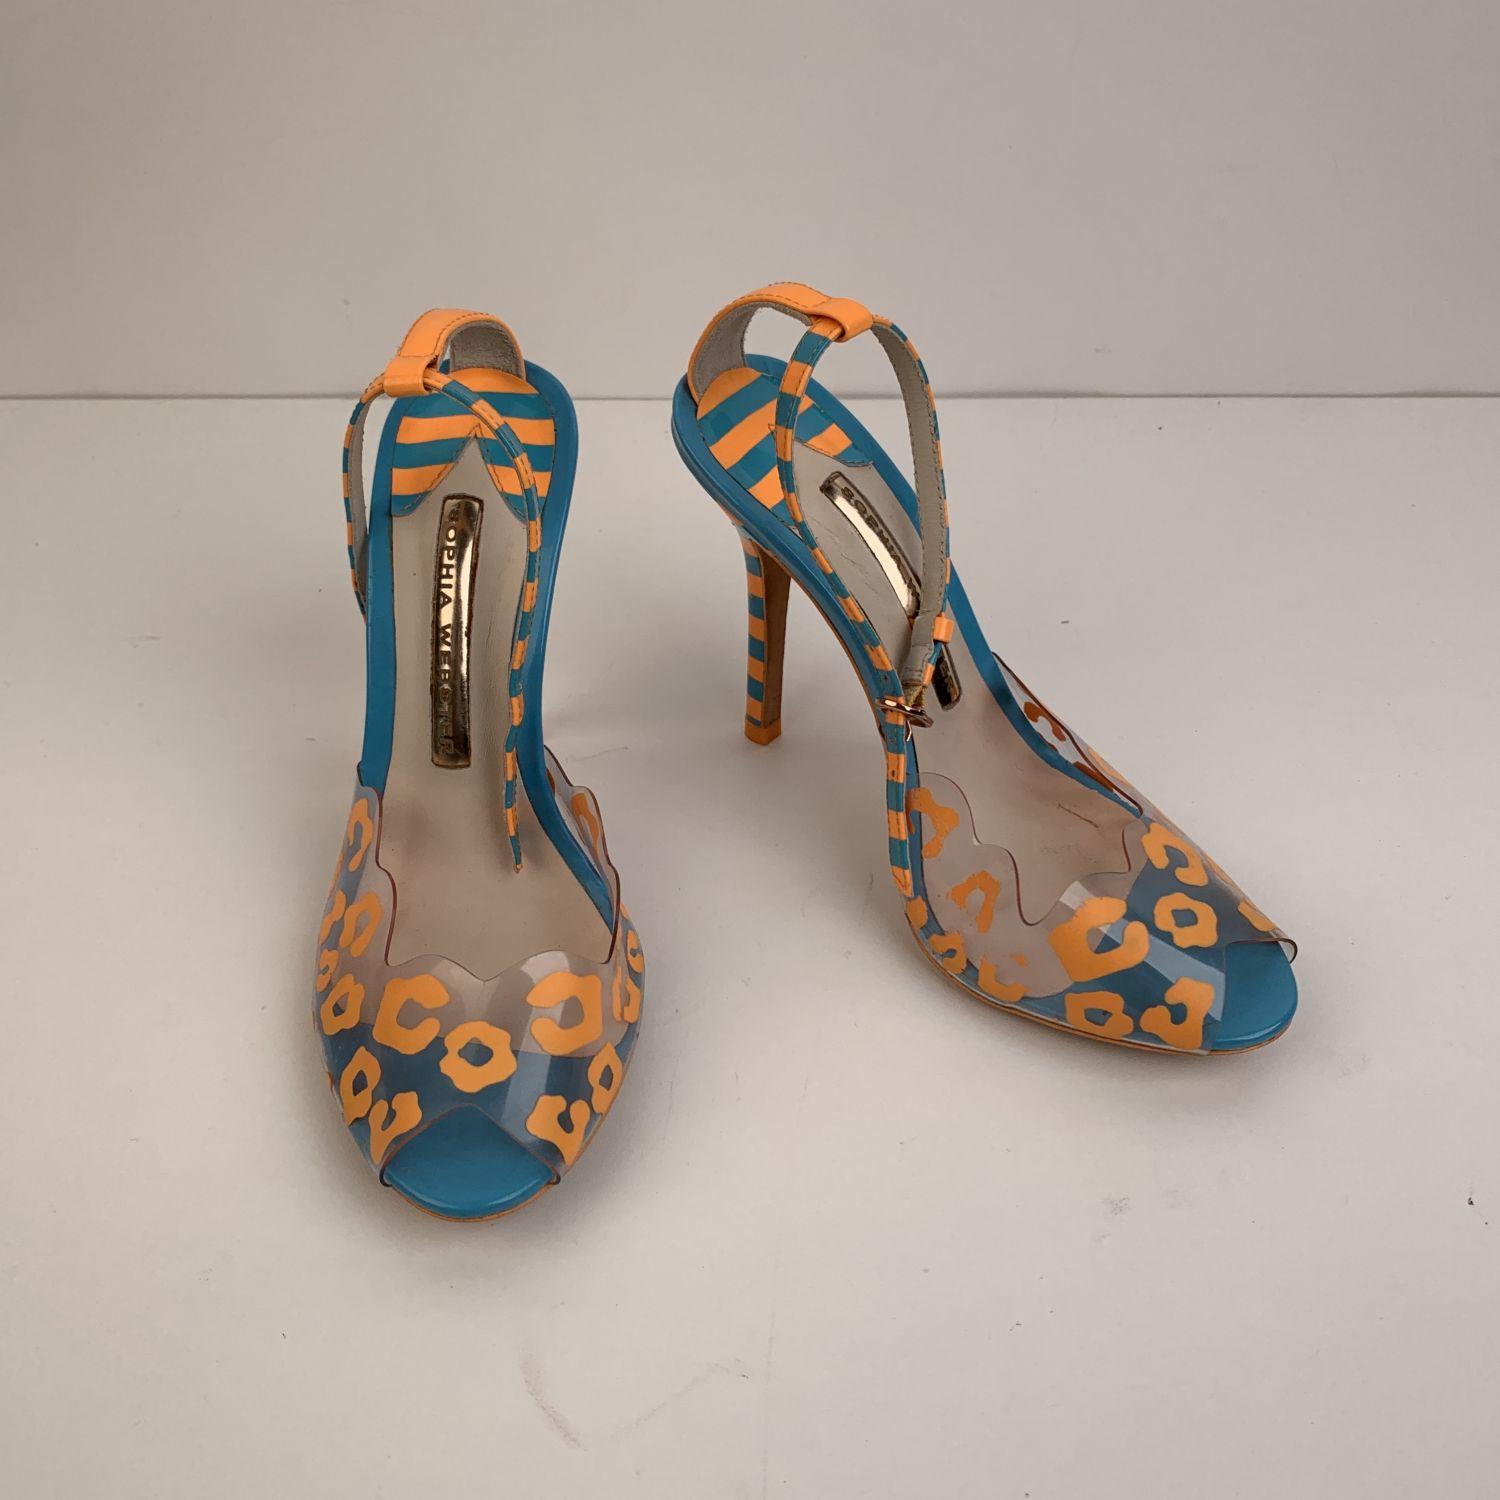 Sophia Webster open toe sandals in orange and blue colors. It features a plastic upper part with an animalier pattern, anckle strap with buckle closure and covered striped heels. Heels height: 4.25 inches - 10,8 cm. Leather insoles and outsoles.